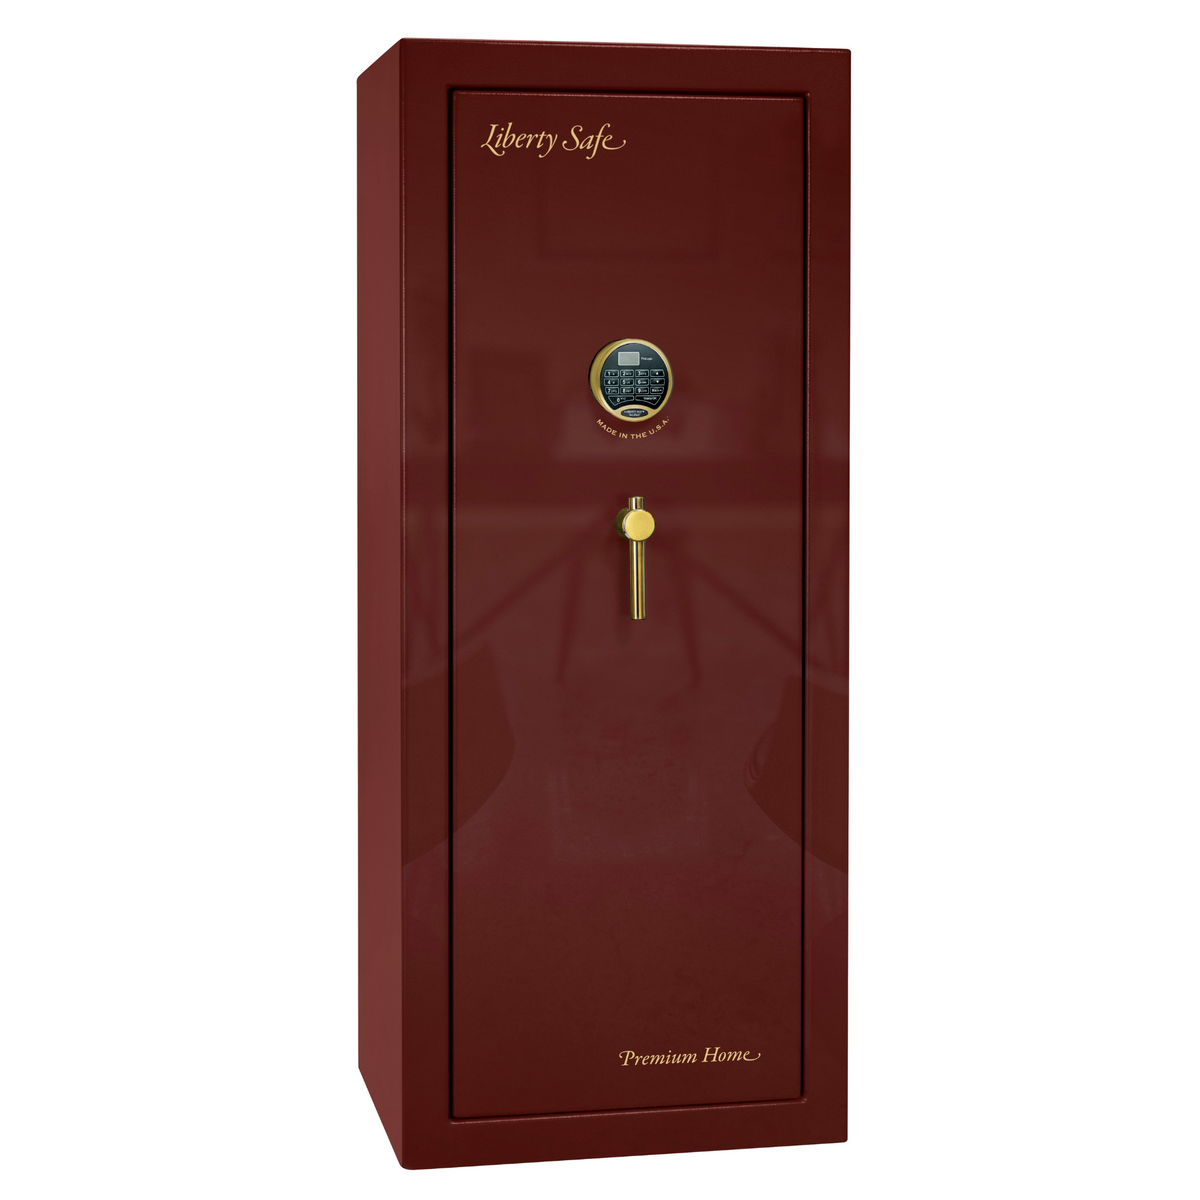 Premium Home Series | Level 7 Security | 2 Hour Fire Protection | 17 | Dimensions: 59.25&quot;(H) x 24&quot;(W) x 20.25&quot;(D) | Burgundy Gloss Brass - Closed Door